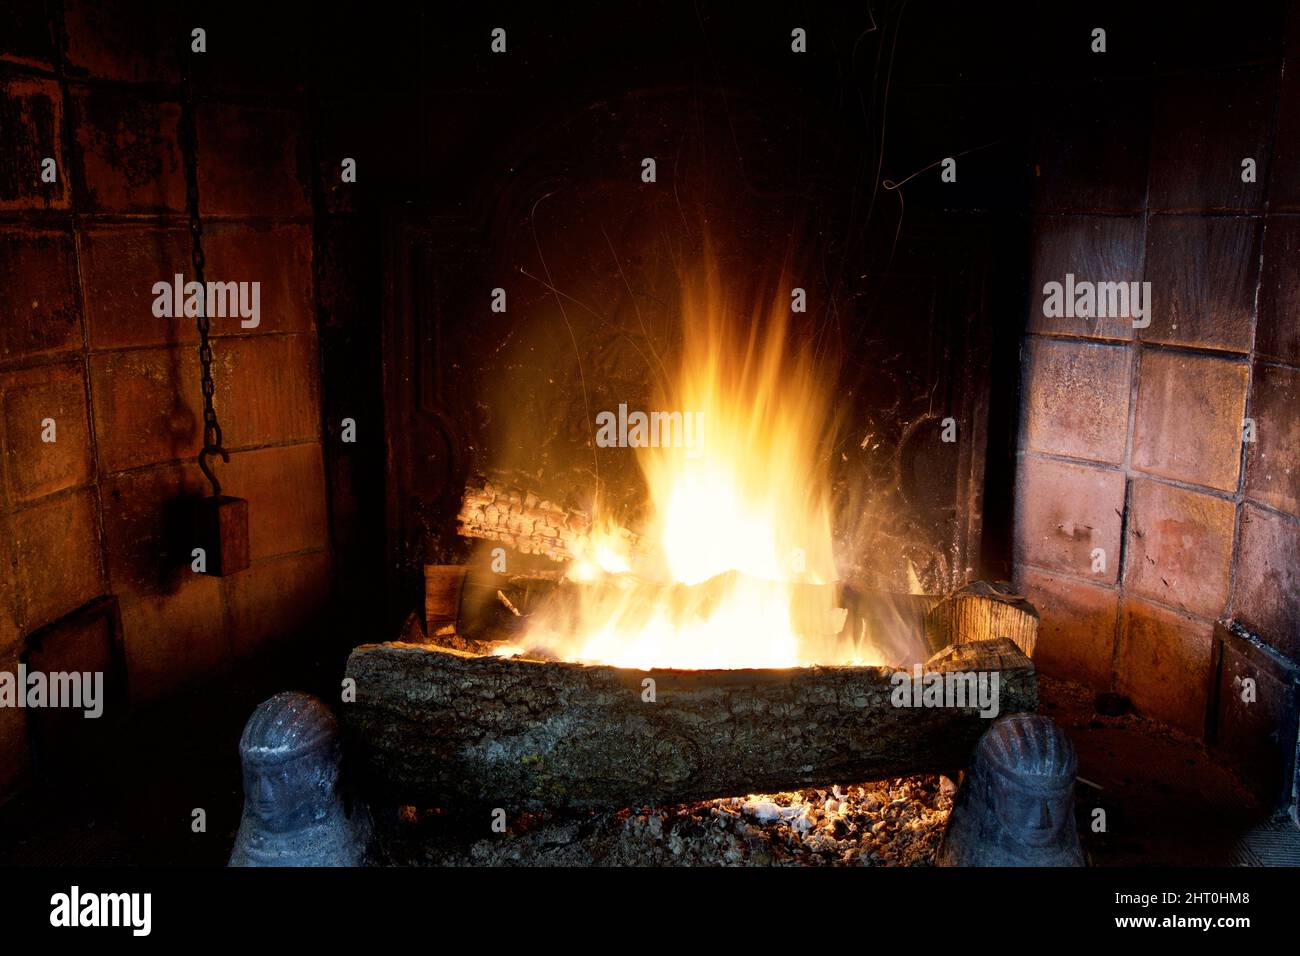 Rustic and vintage fireplace Stock Photo